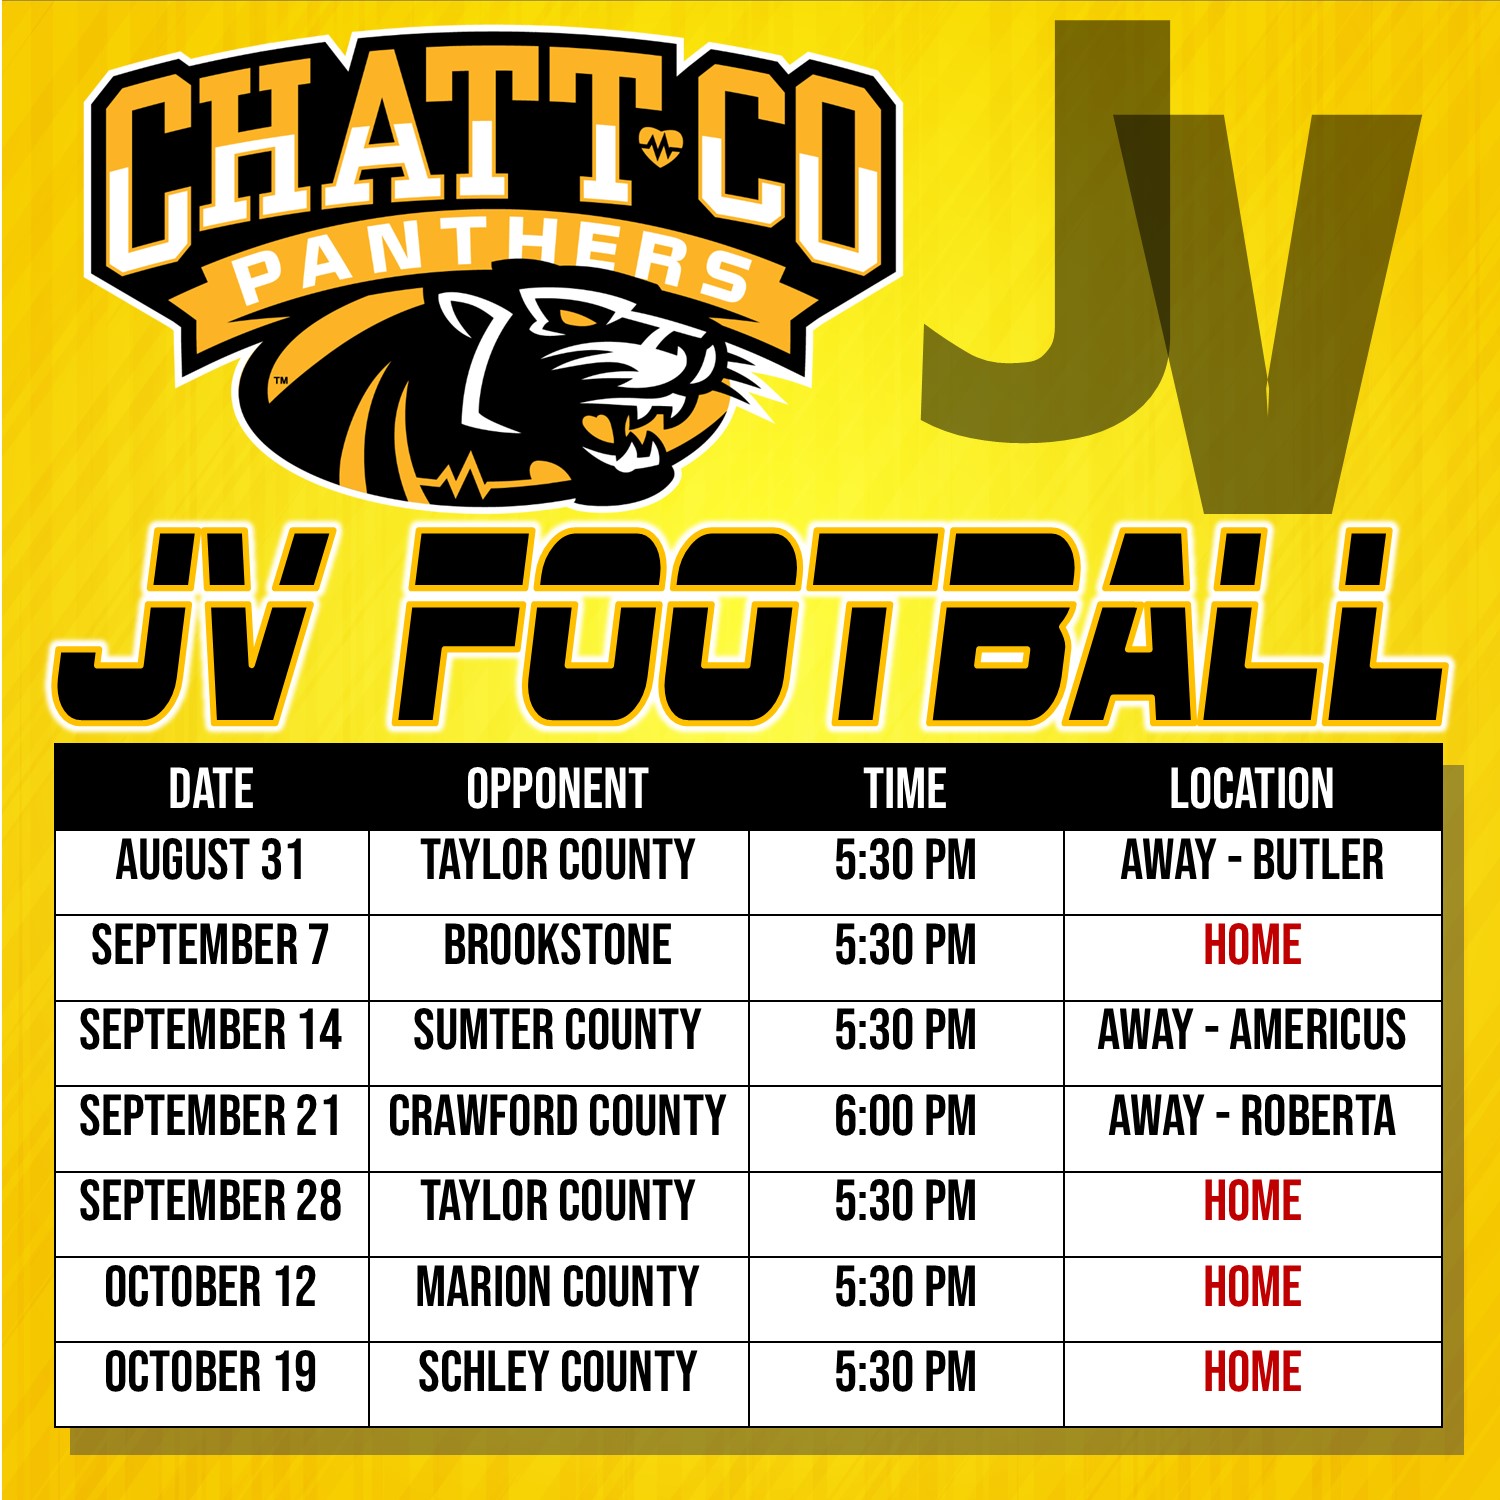 ChattCo Panthers JV Football 2023 AUG 31  Taylor County  5:30  AWAY (Butler) SEPT 7  Brookstone  5:30  HOME SEPT 14  Sumter County  5:30 AWAY (Americus) SEPT 21  Crawford County  6:00  AWAY (Roberta) SEPT 28  Taylor County  5:30  HOME OCT 12  Marion County  5:30  HOME OCT 19  Schley County  5:30  HOME